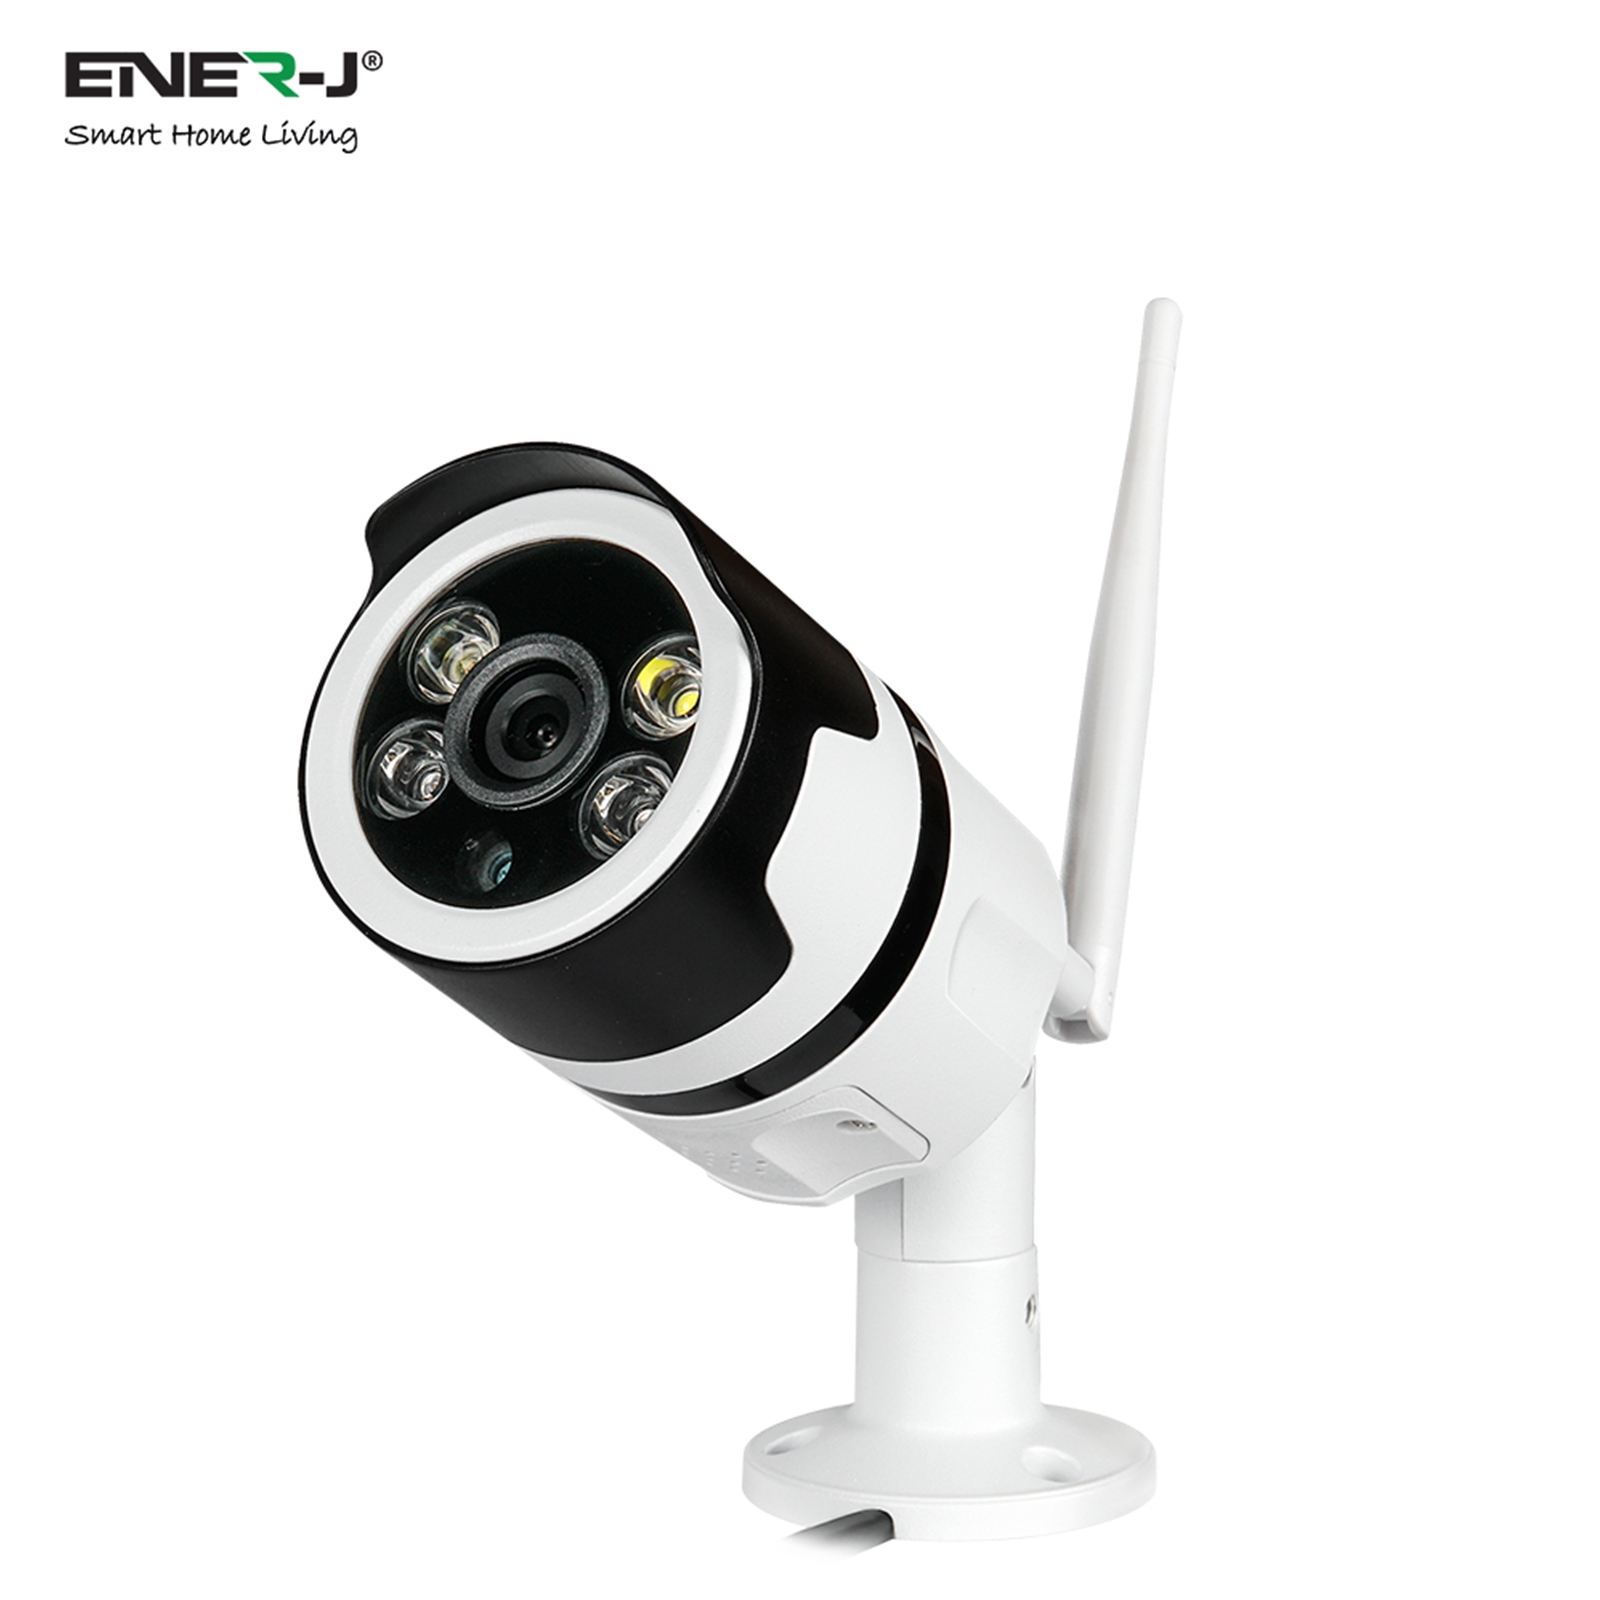 ENER-J Smart Outdoor WiFi IP Camera, Night Vision, Two Way Audio, Motion Detection with 1080P Video